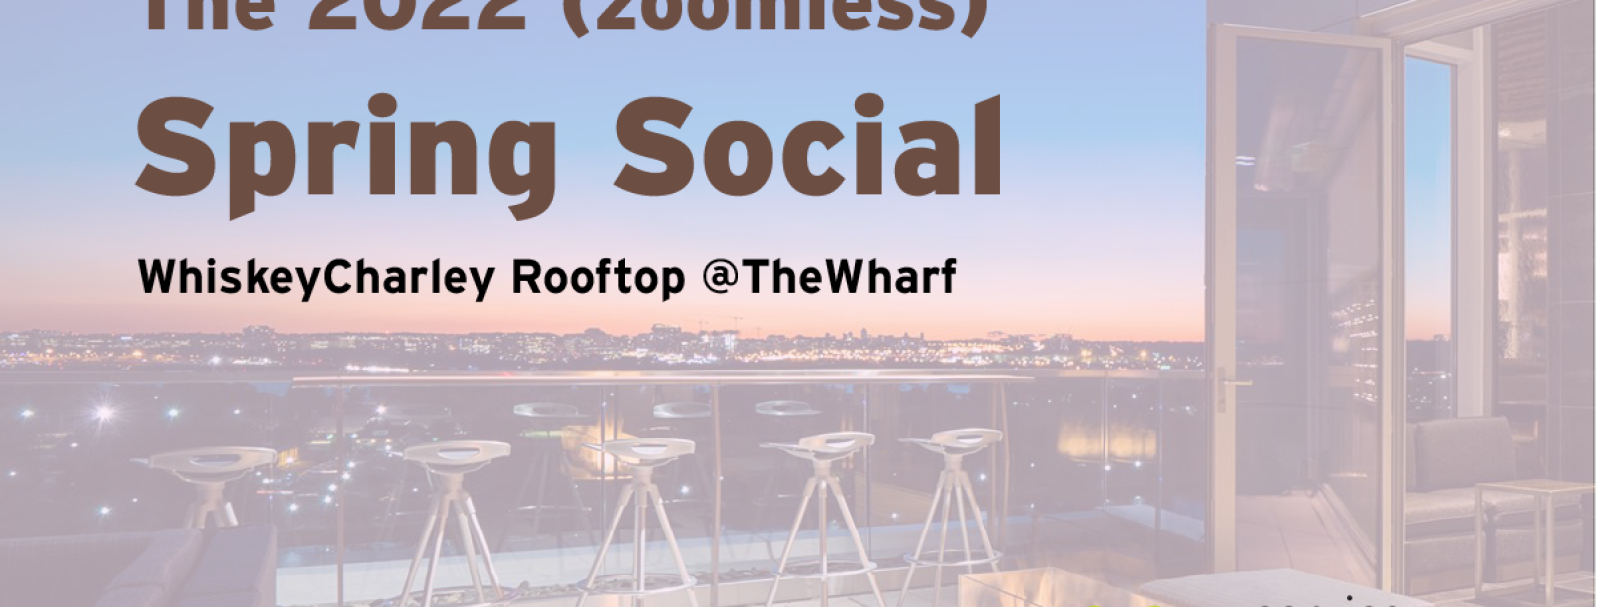 The 2022 (Zoomless) Spring Social: Cherry-blossom edition